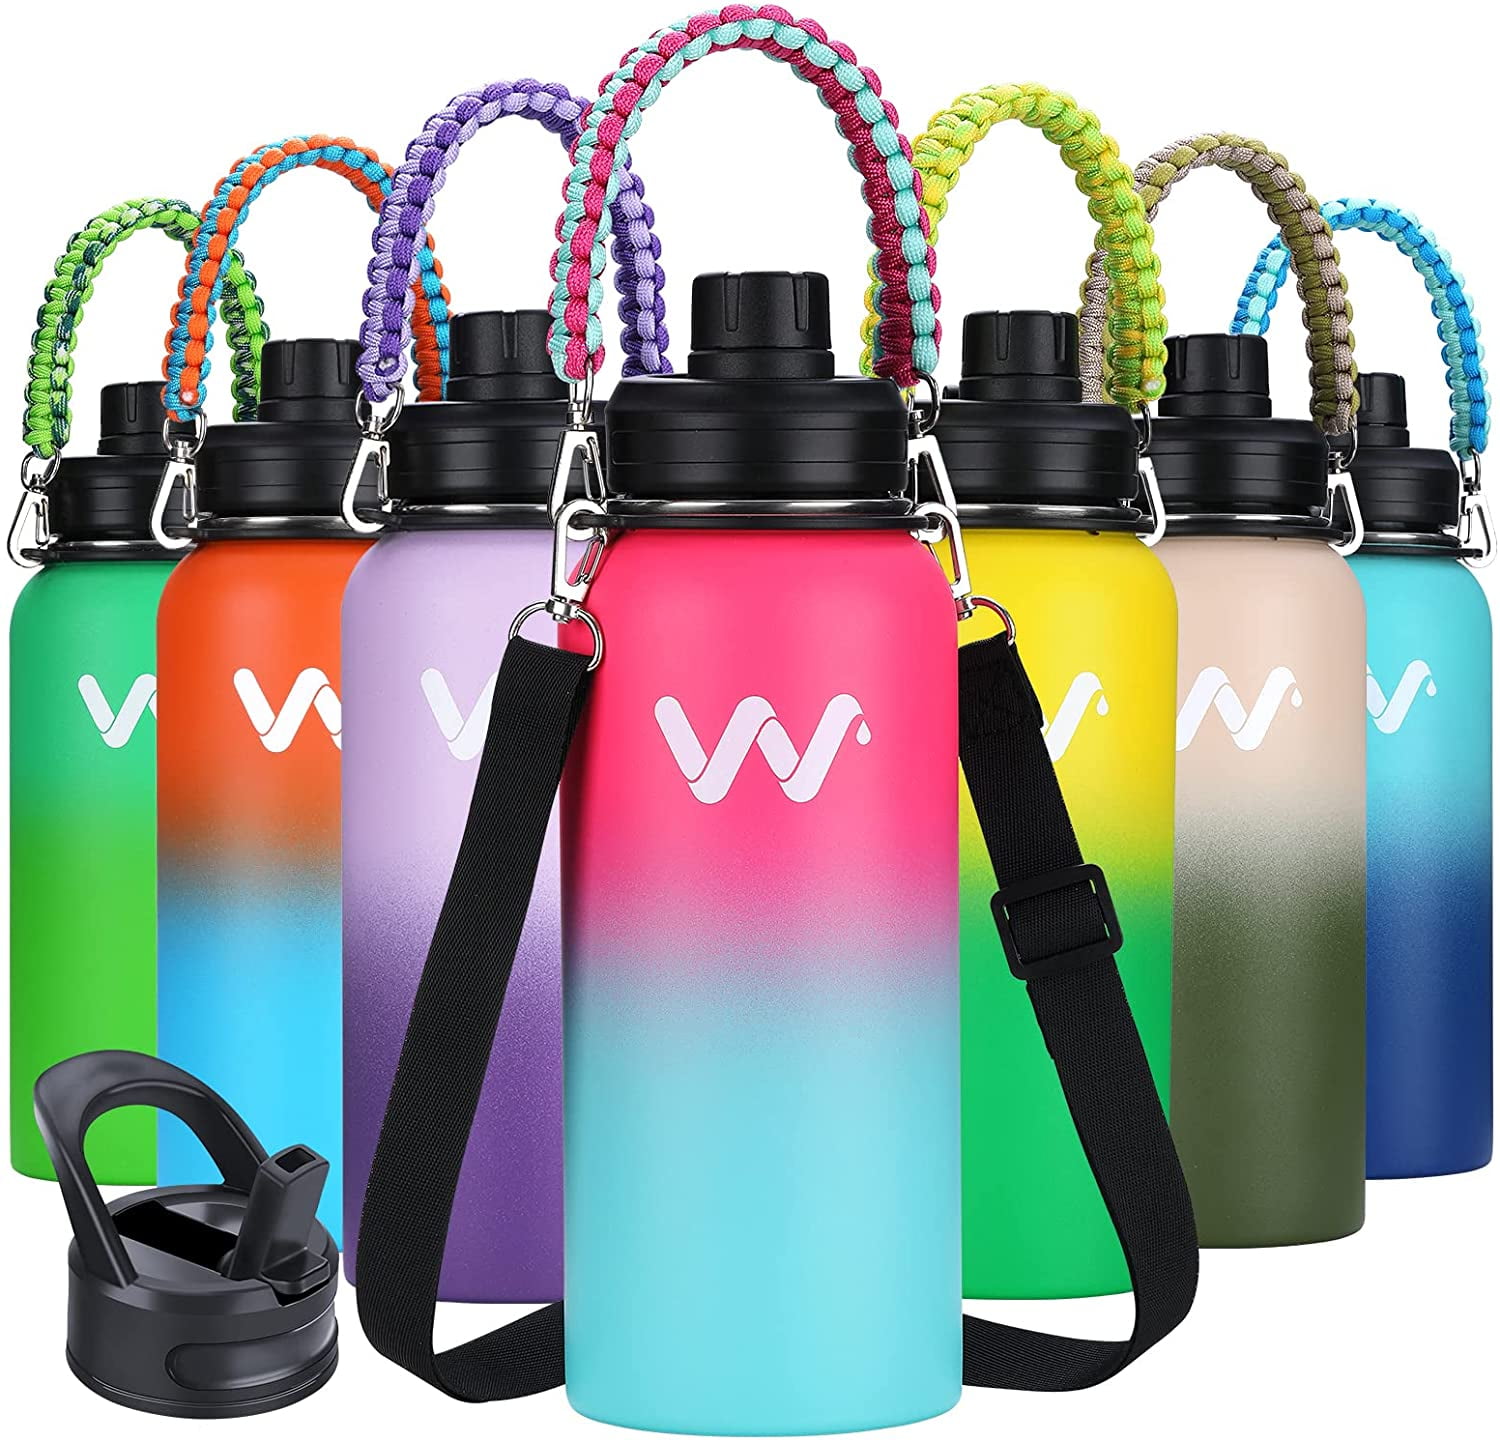 Insulated Water Bottle with Straw Lid & Spout Lid, - 32 oz - Vacuum Insulated - Stainless Steel Reusable Water Bottle, Size: 32oz